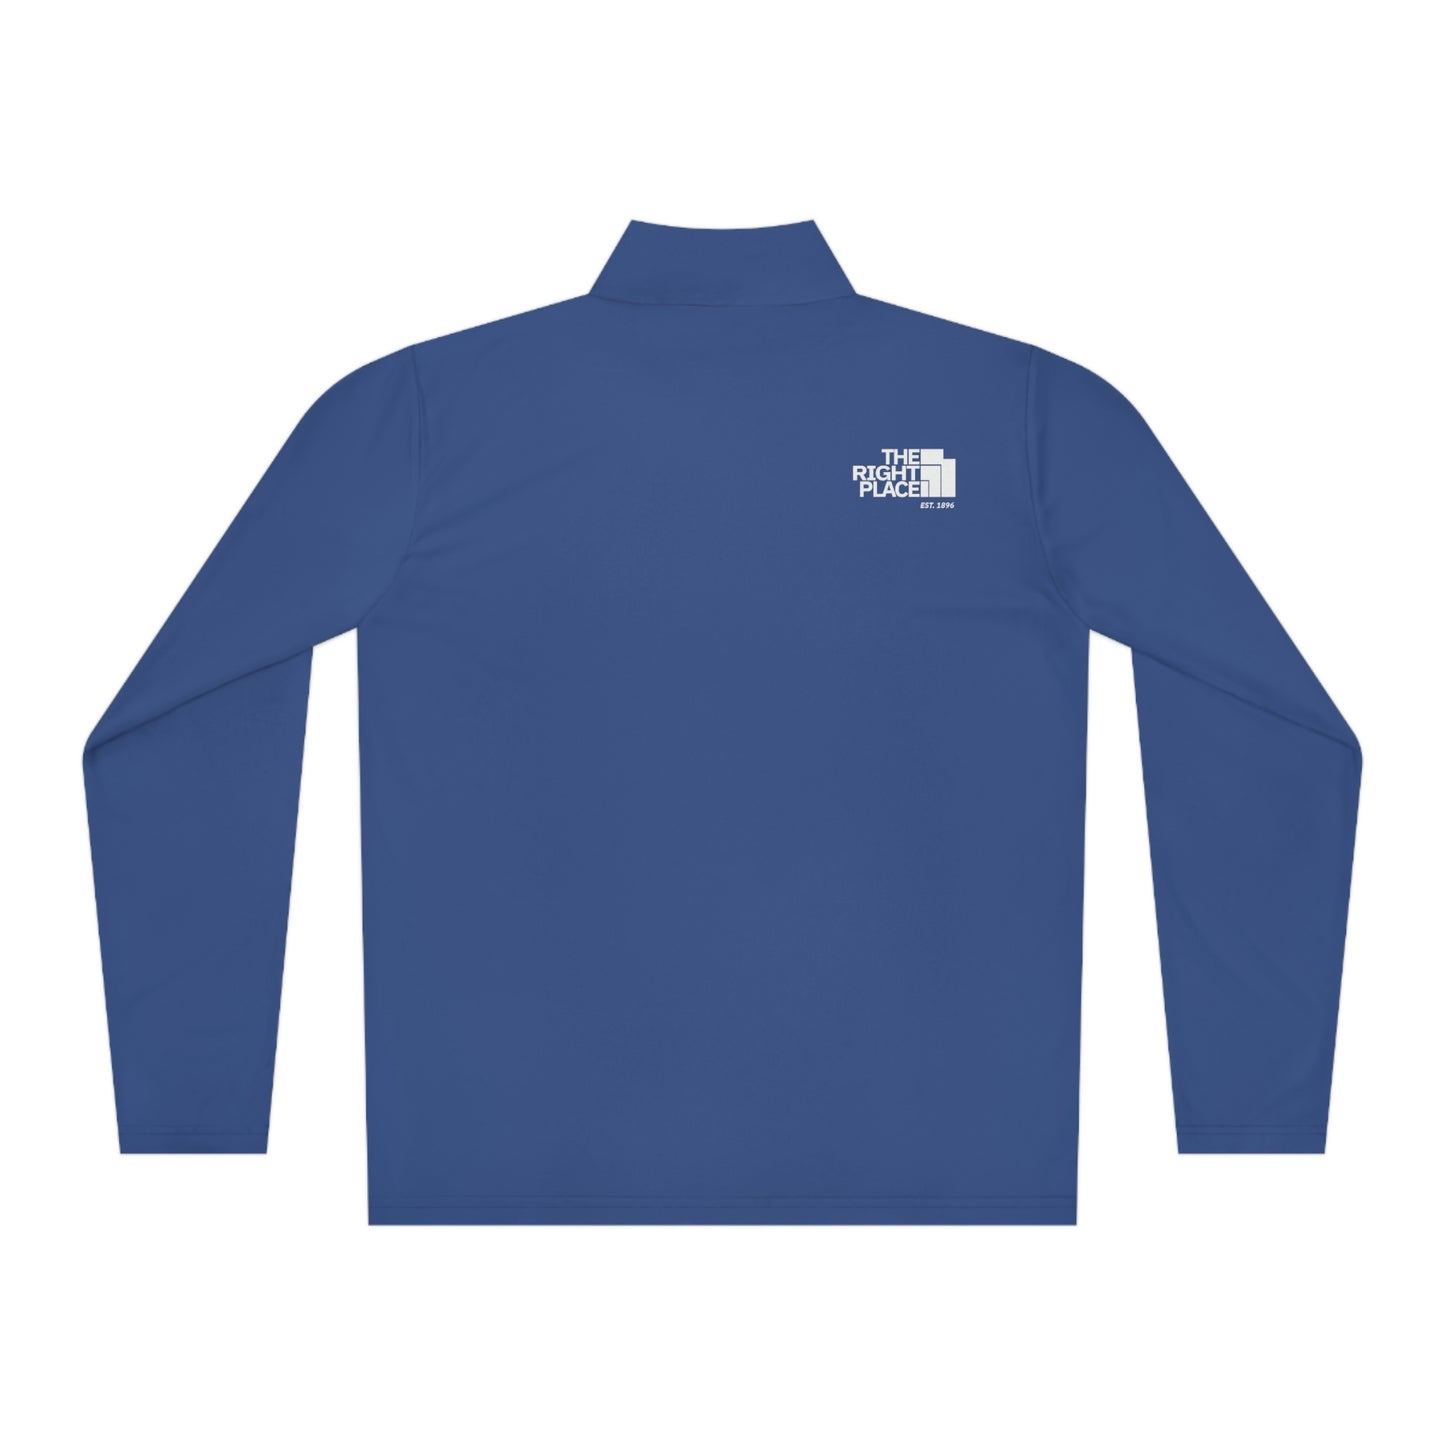 State of Utah “This is the right place” Unisex Quarter-Zip Pullover